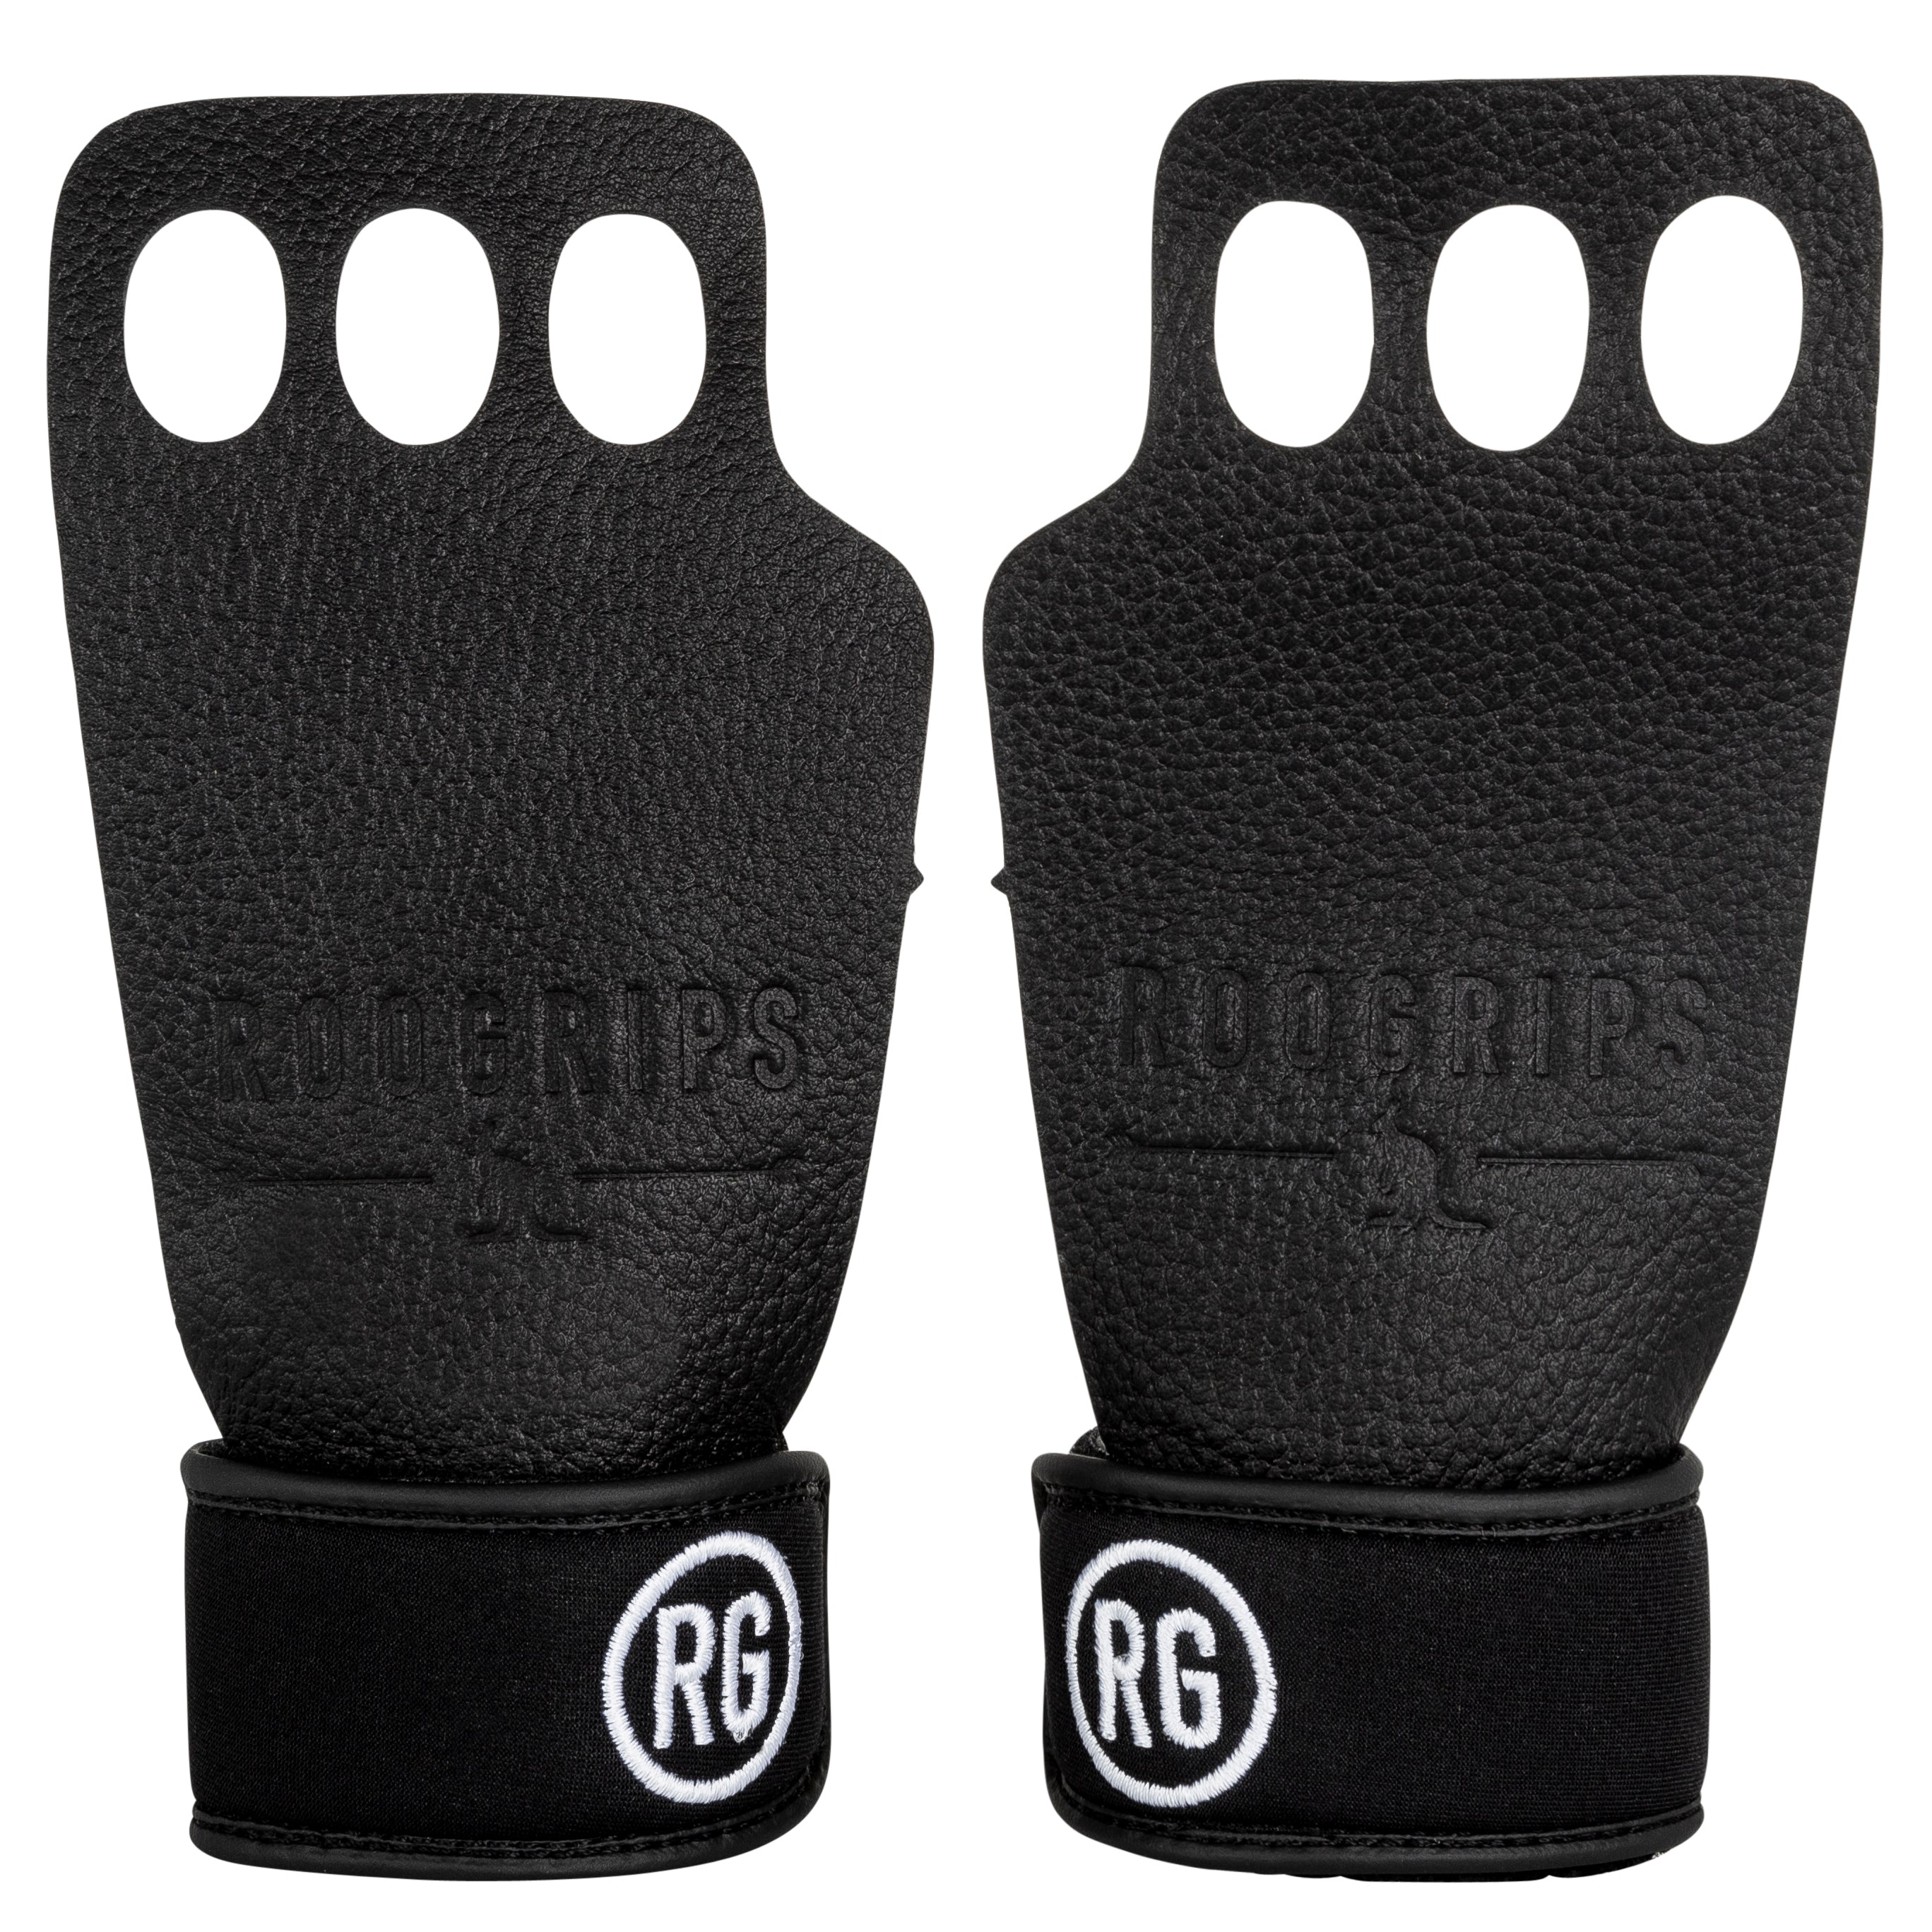 3 Finger Protective Leather Hand Grips Black